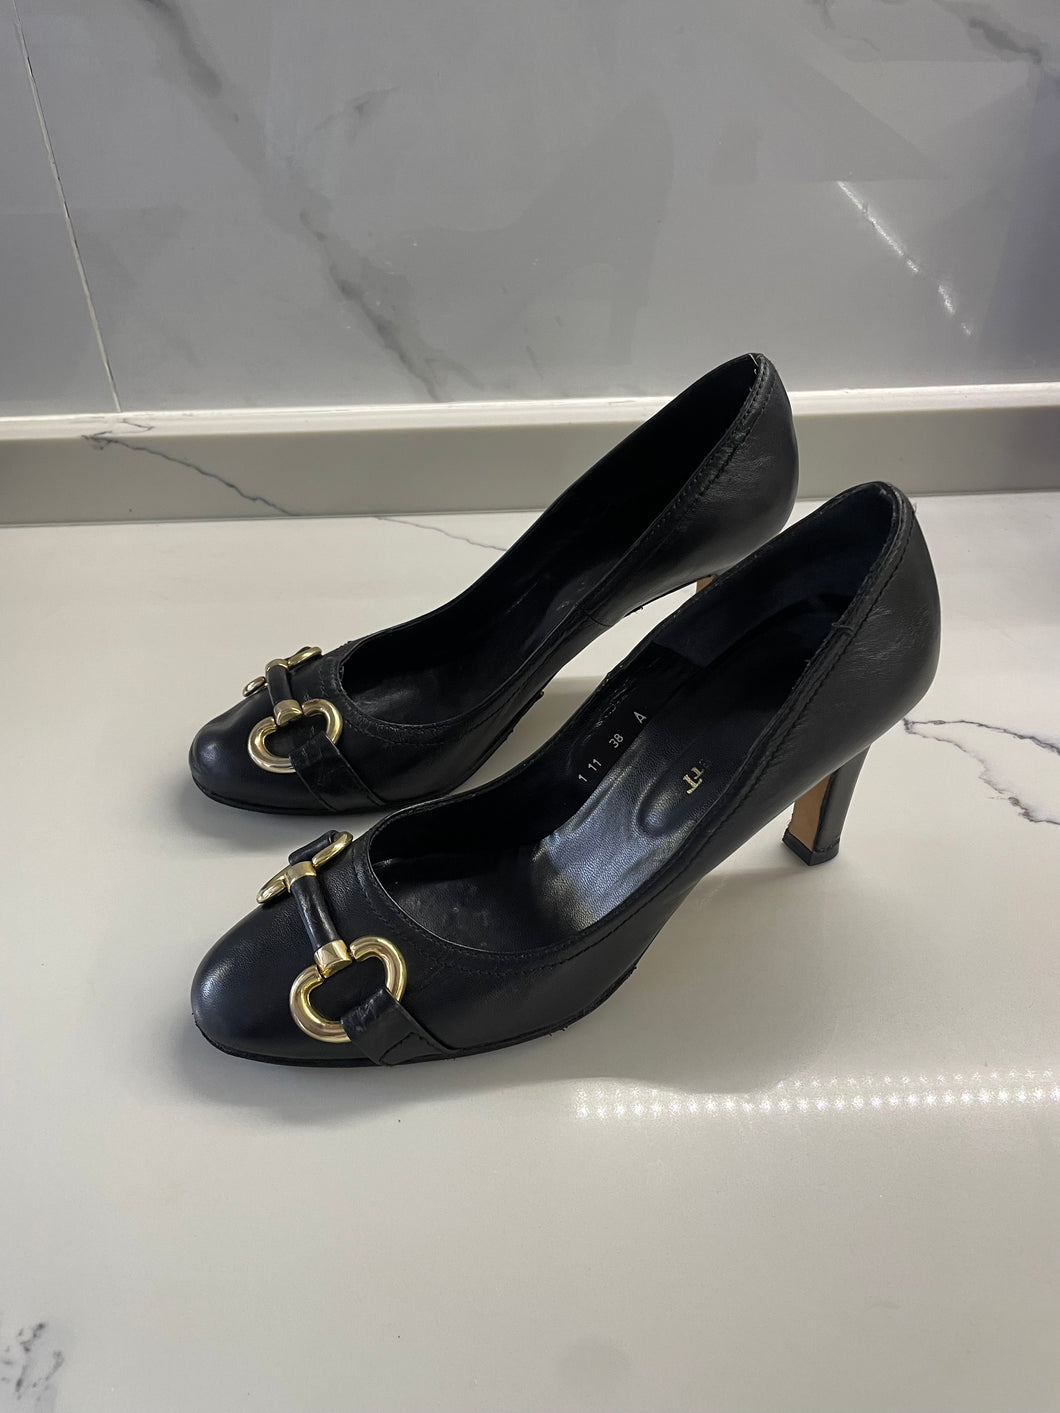 Vintage Italian leather court pumps heels with gold buckle detailing EU38 / UK5